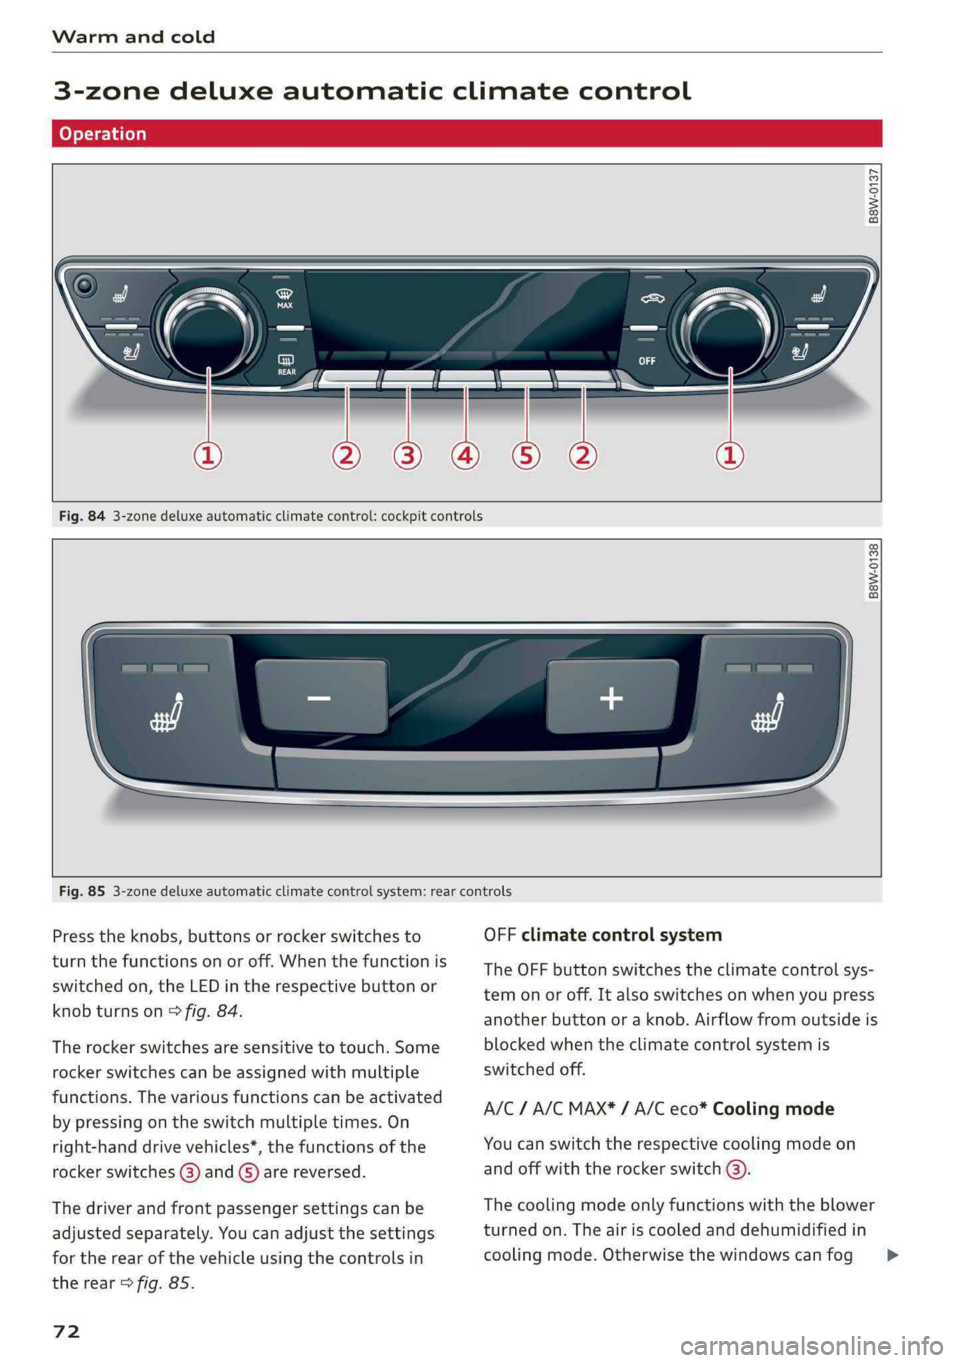 AUDI S4 2019  Owners Manual Warmandcold
 
3-zonedeluxeautomaticclimatecontrol
 
B8W-0137
 
 
 
 
Fig.843-zonedeluxeautomaticclimatecontrol:cockpitcontrols
 
 
 
B8W-0138
  
Fig.853-zonedeluxeautomaticclimatecontrolsystem:rearcon